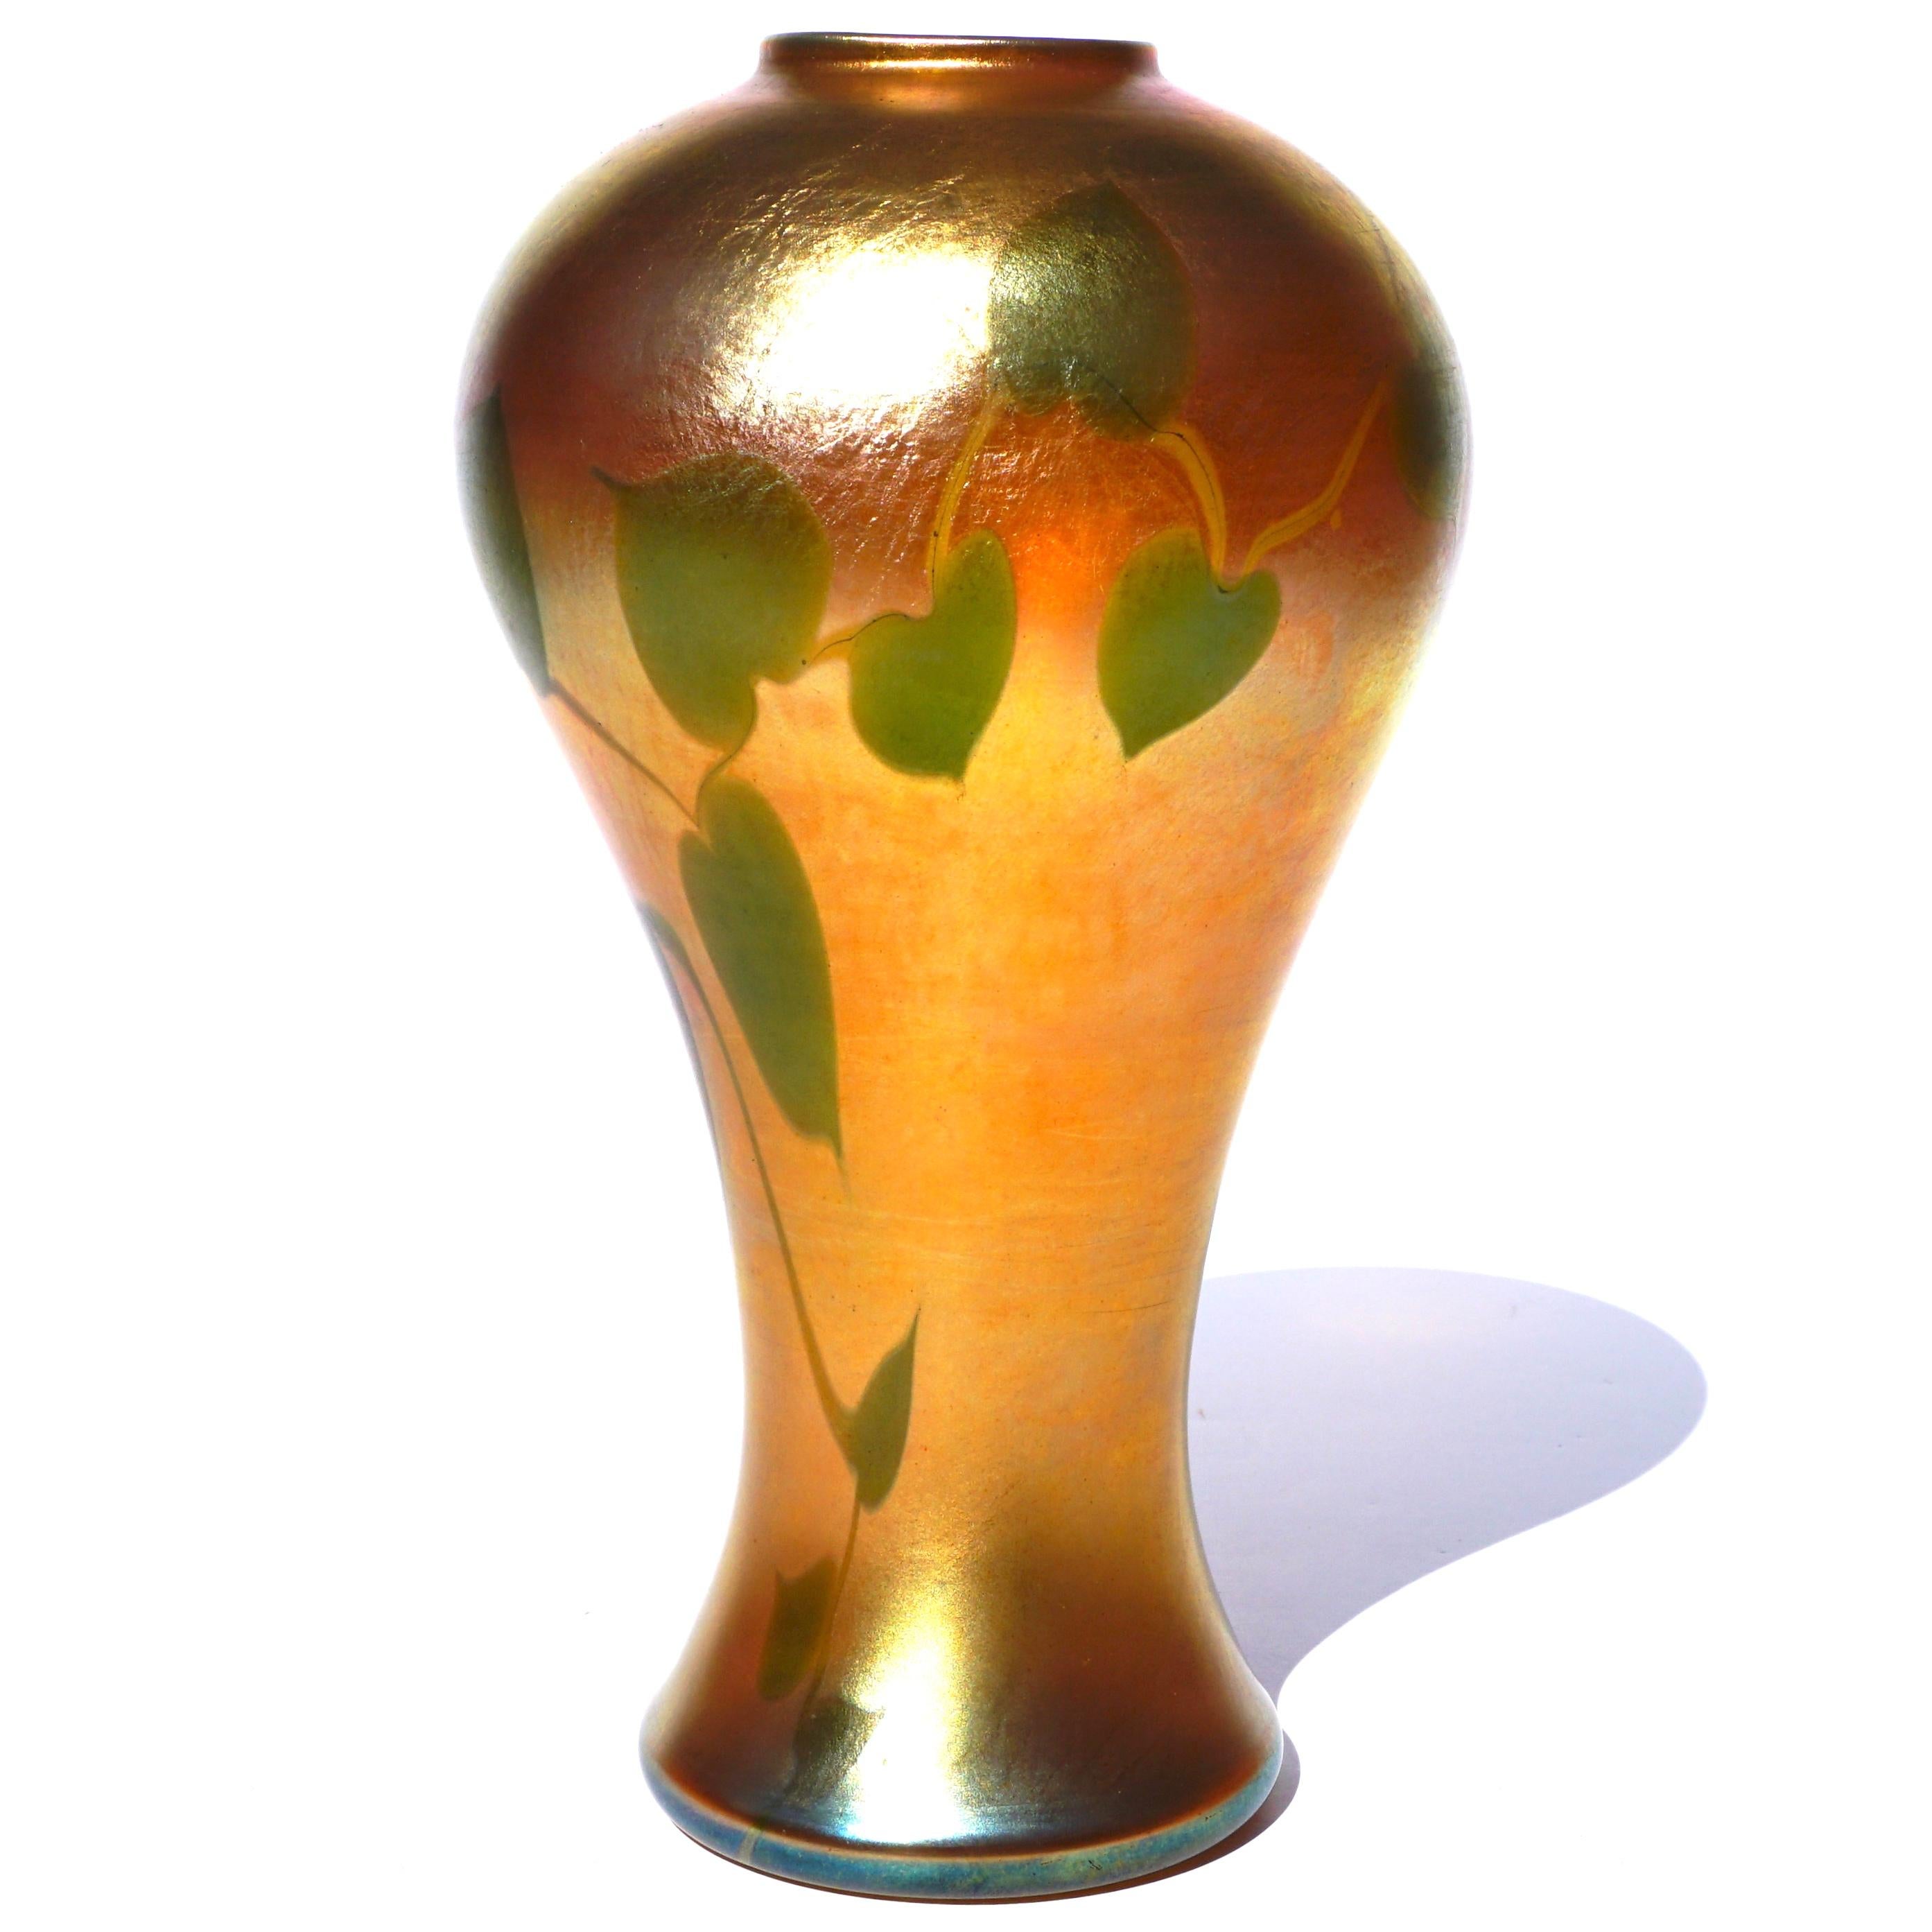 Tiffany Studios Favrile glass leaf and vine vase, circa 1910. With a desirable bulbous rimmed form and a beautiful deep gold irredentist favrile effect decorated with leaves and vines. A very nice addition to your Art Nouveau - Art Deco decor or Art